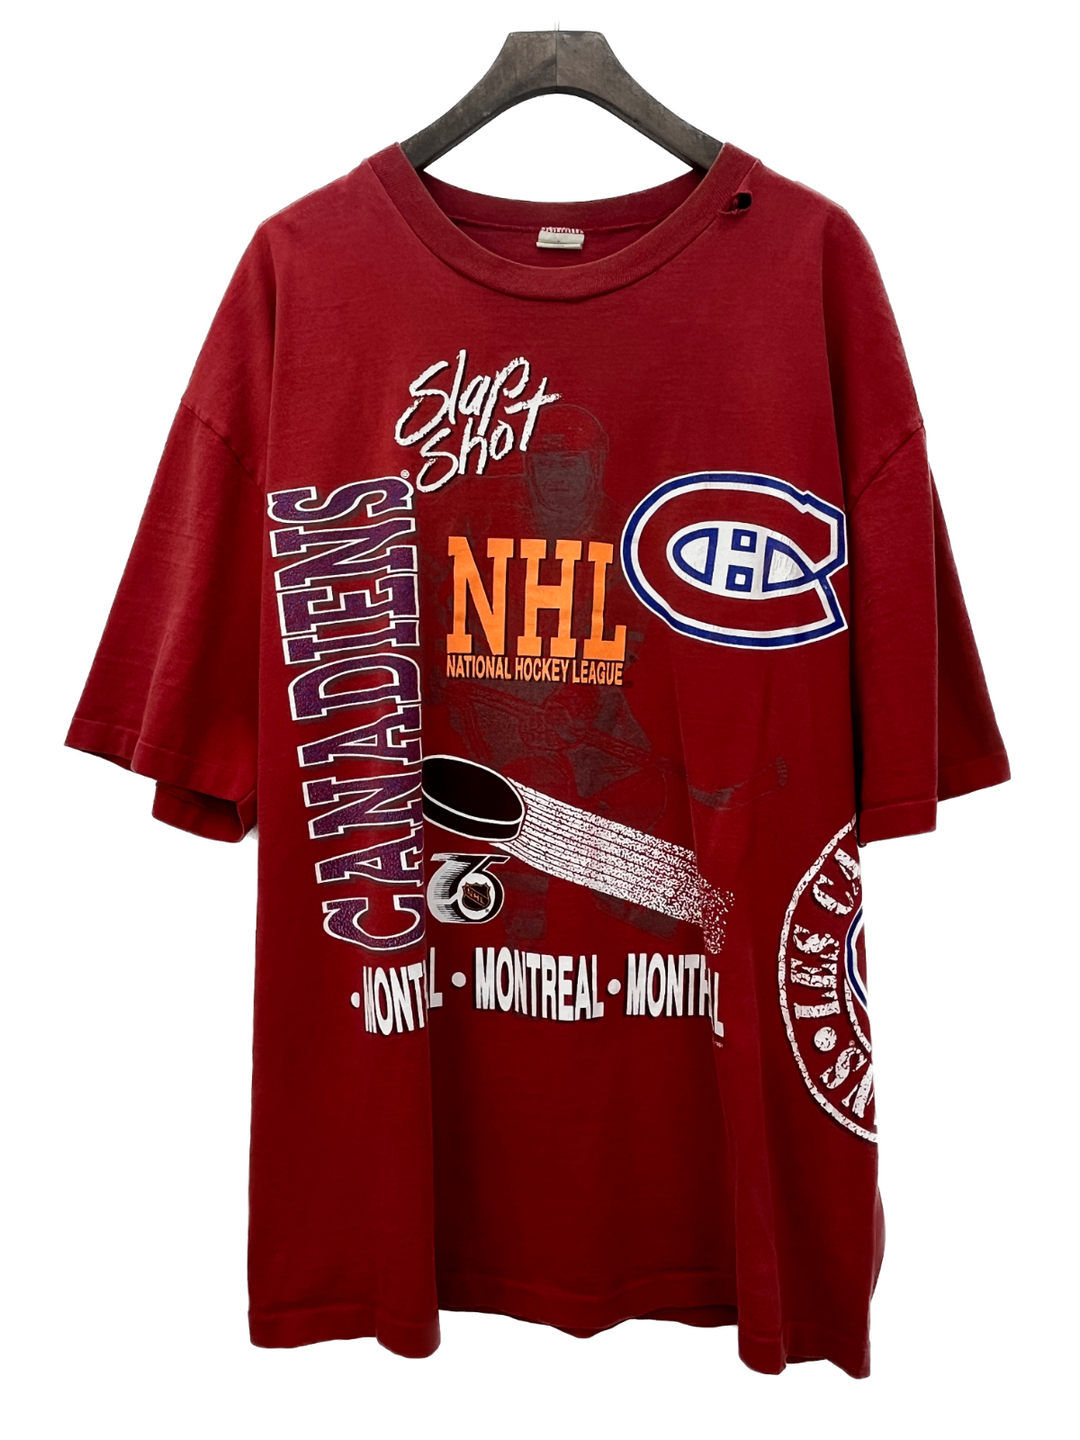 1991 Montreal Canadiens Wrap Around Print Vintage Hockey T-shirt Size XL Red NHL